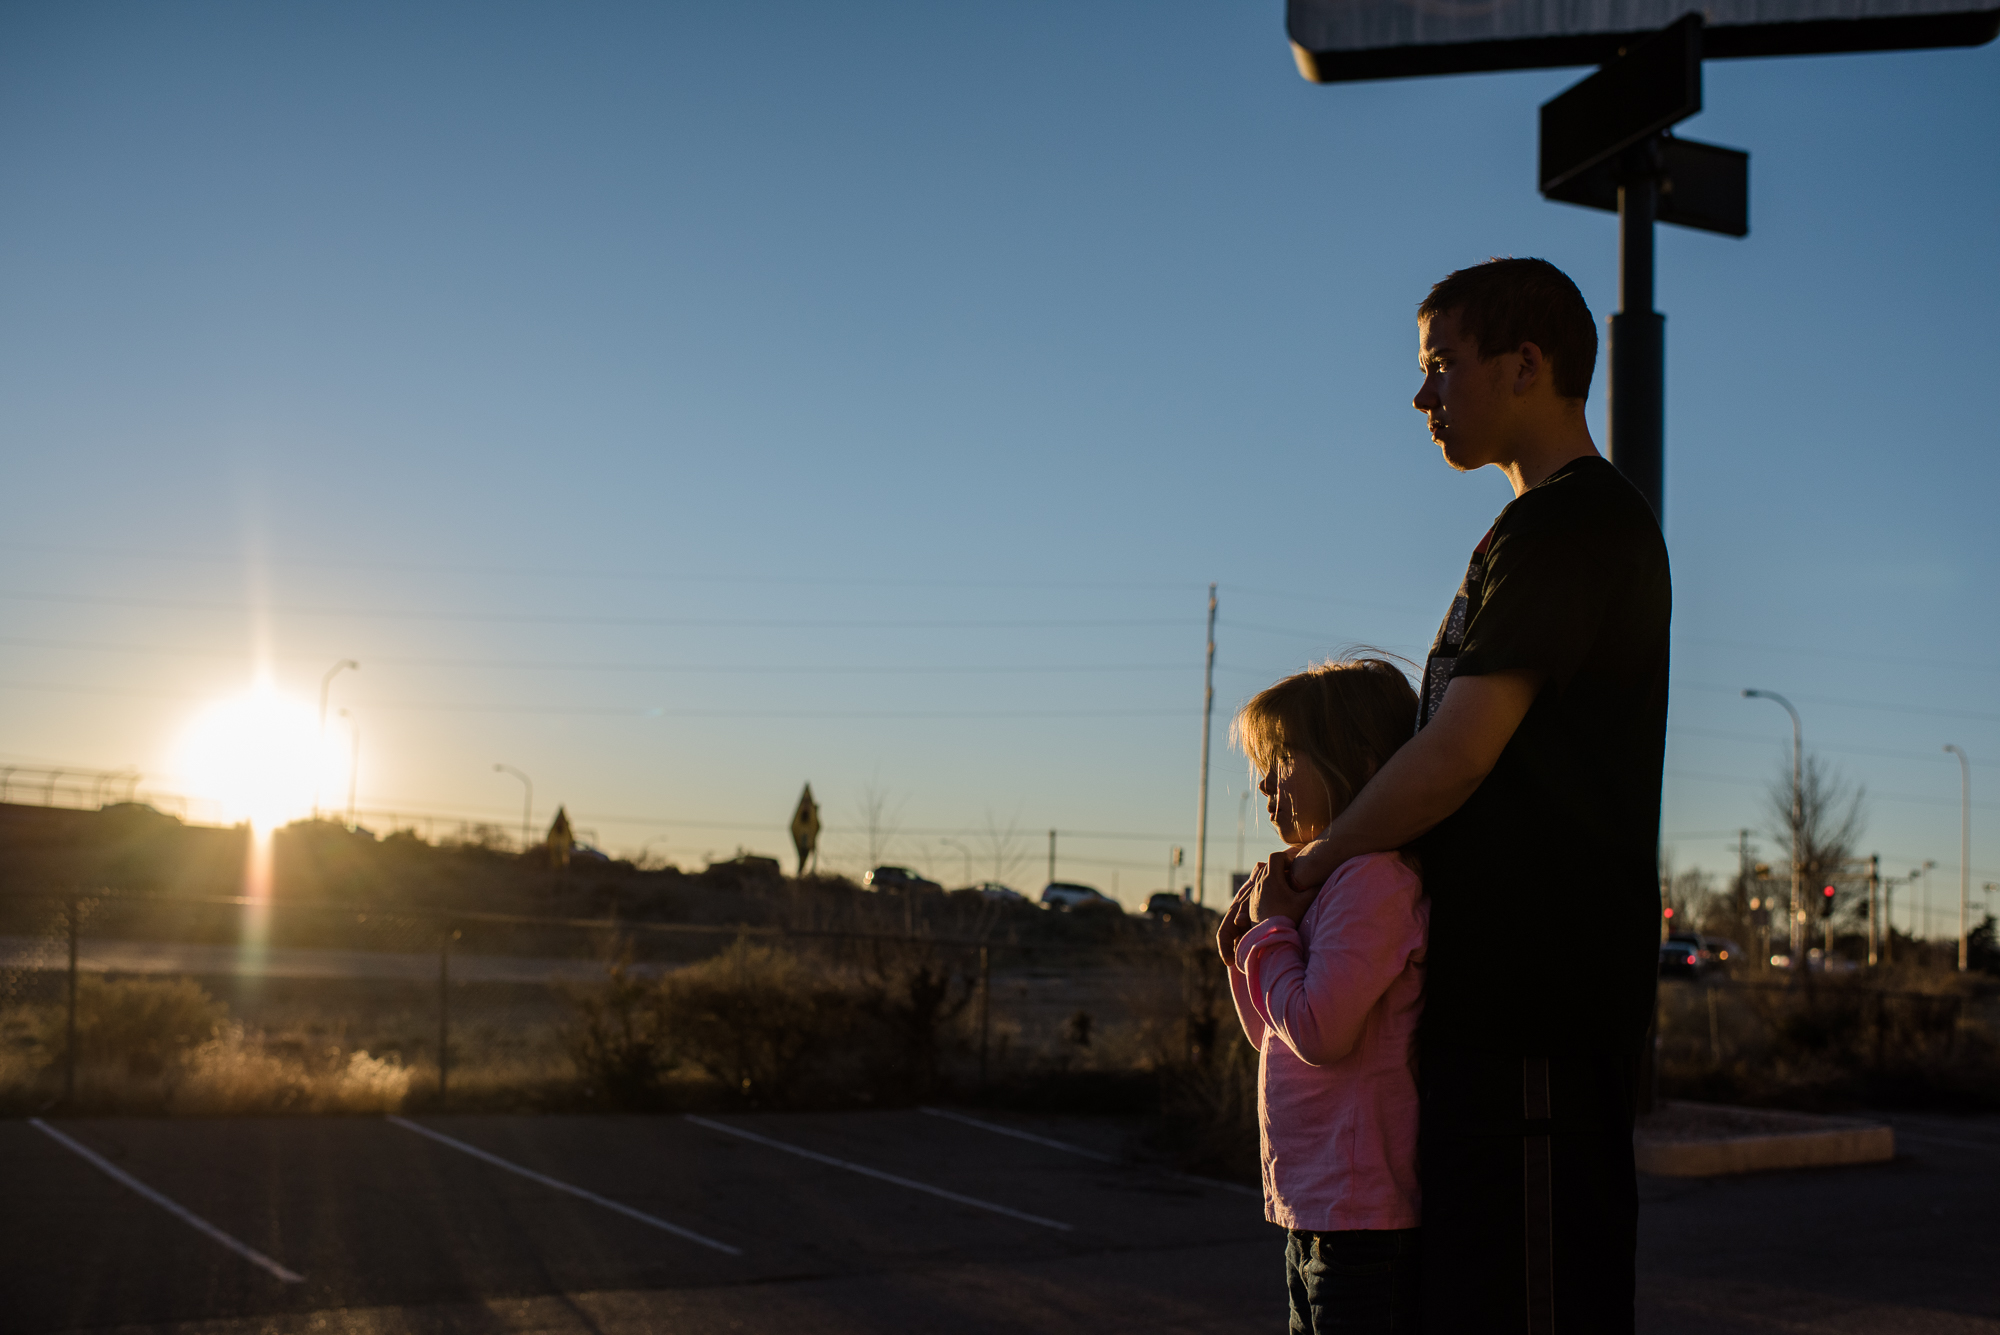  Vinny, age 16, and Elycia, age 7, watch the sunset behind Interstate 40 from the motel parking lot, 2015. 